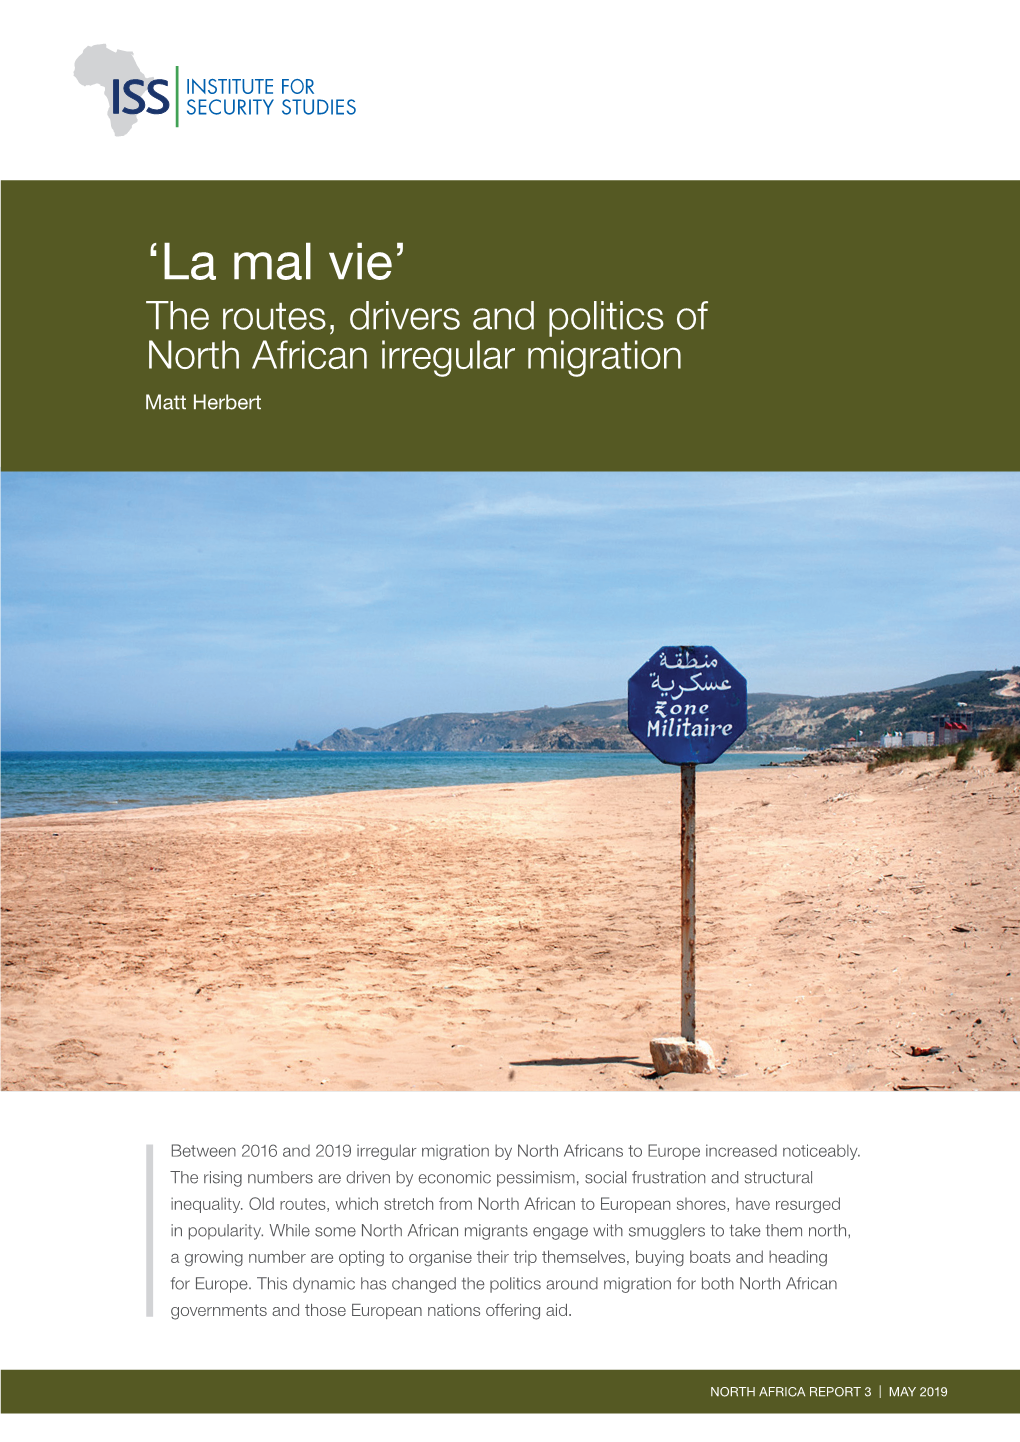 'La Mal Vie': the Routes, Drivers and Politics of North African Irregular